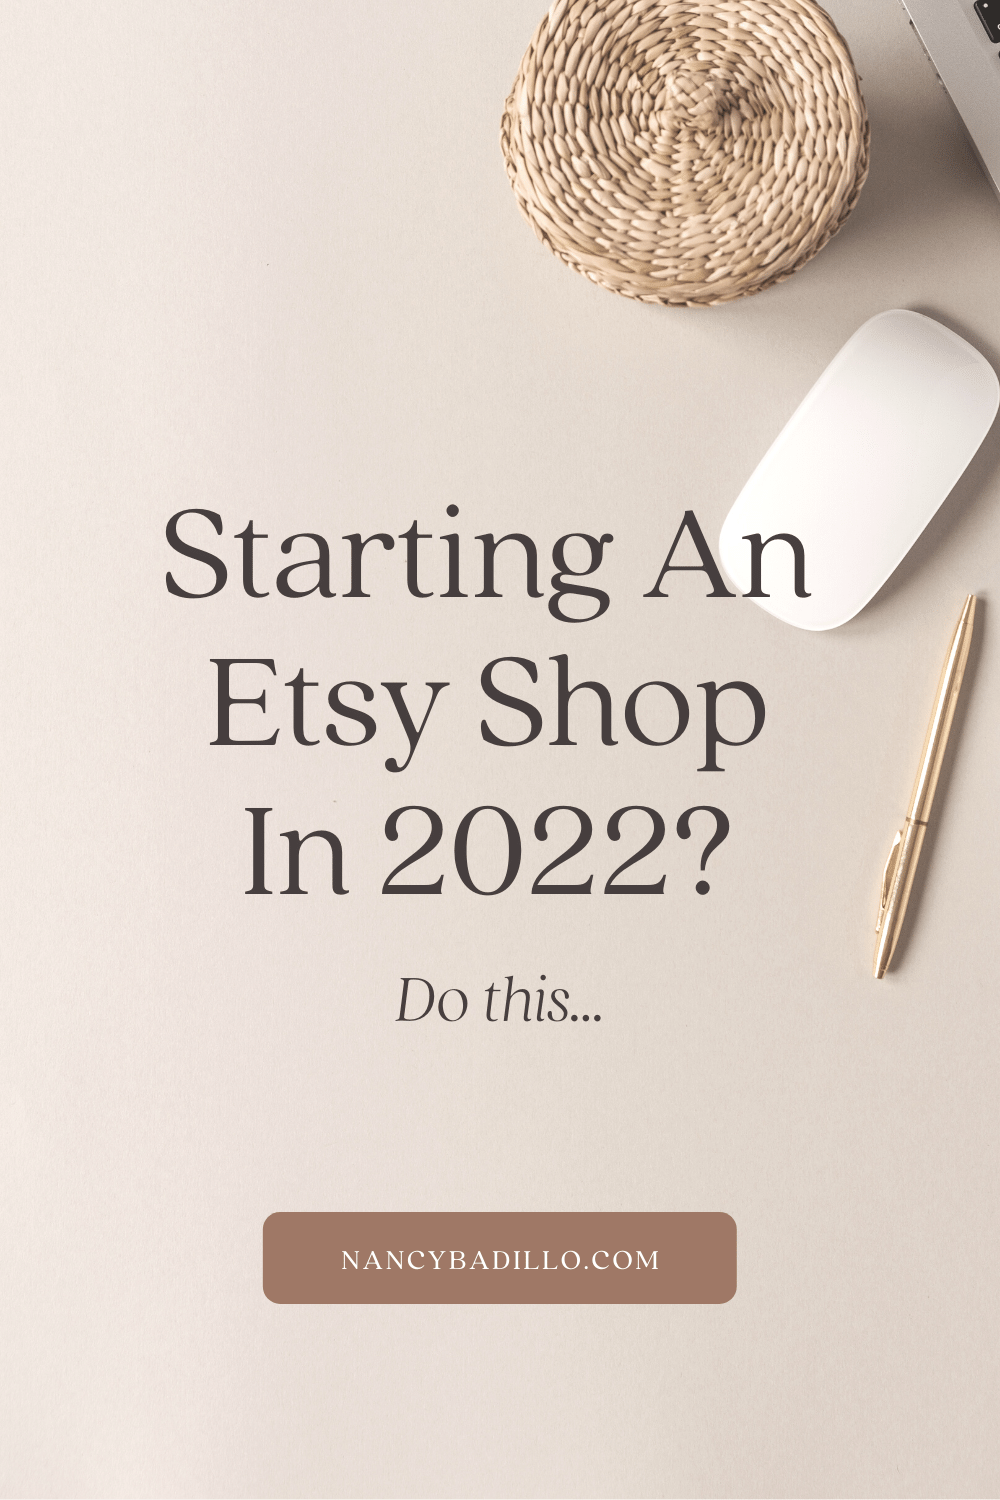 Starting An Etsy Shop In 2022